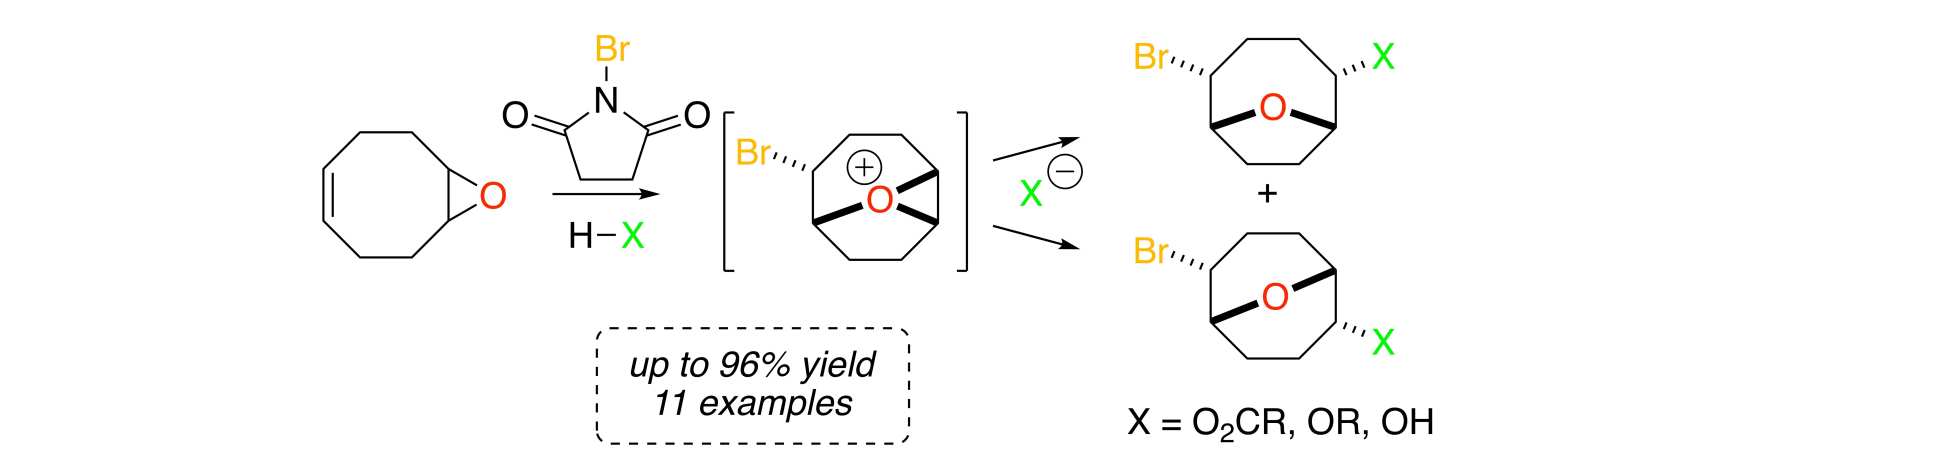 Intramolecular Bromonium Ion Assisted Epoxide Ring-Opening: Capture of the Oxonium Ion with an Added External Nucleophile